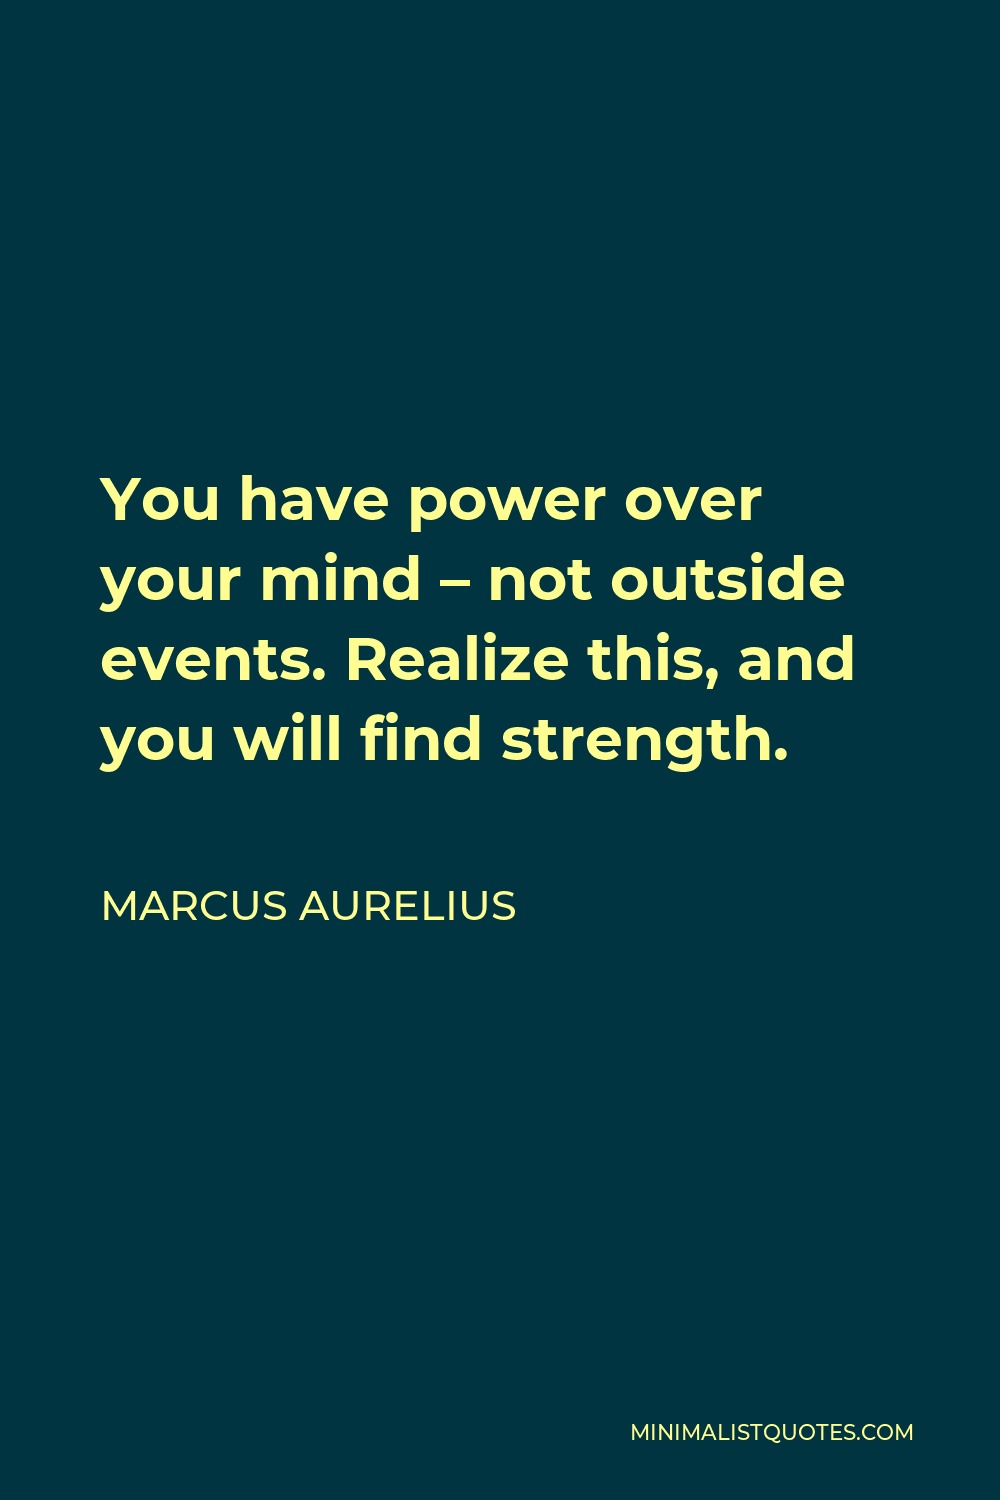 Marcus Aurelius Quote - You have power over your mind – not outside events. Realize this, and you will find strength.